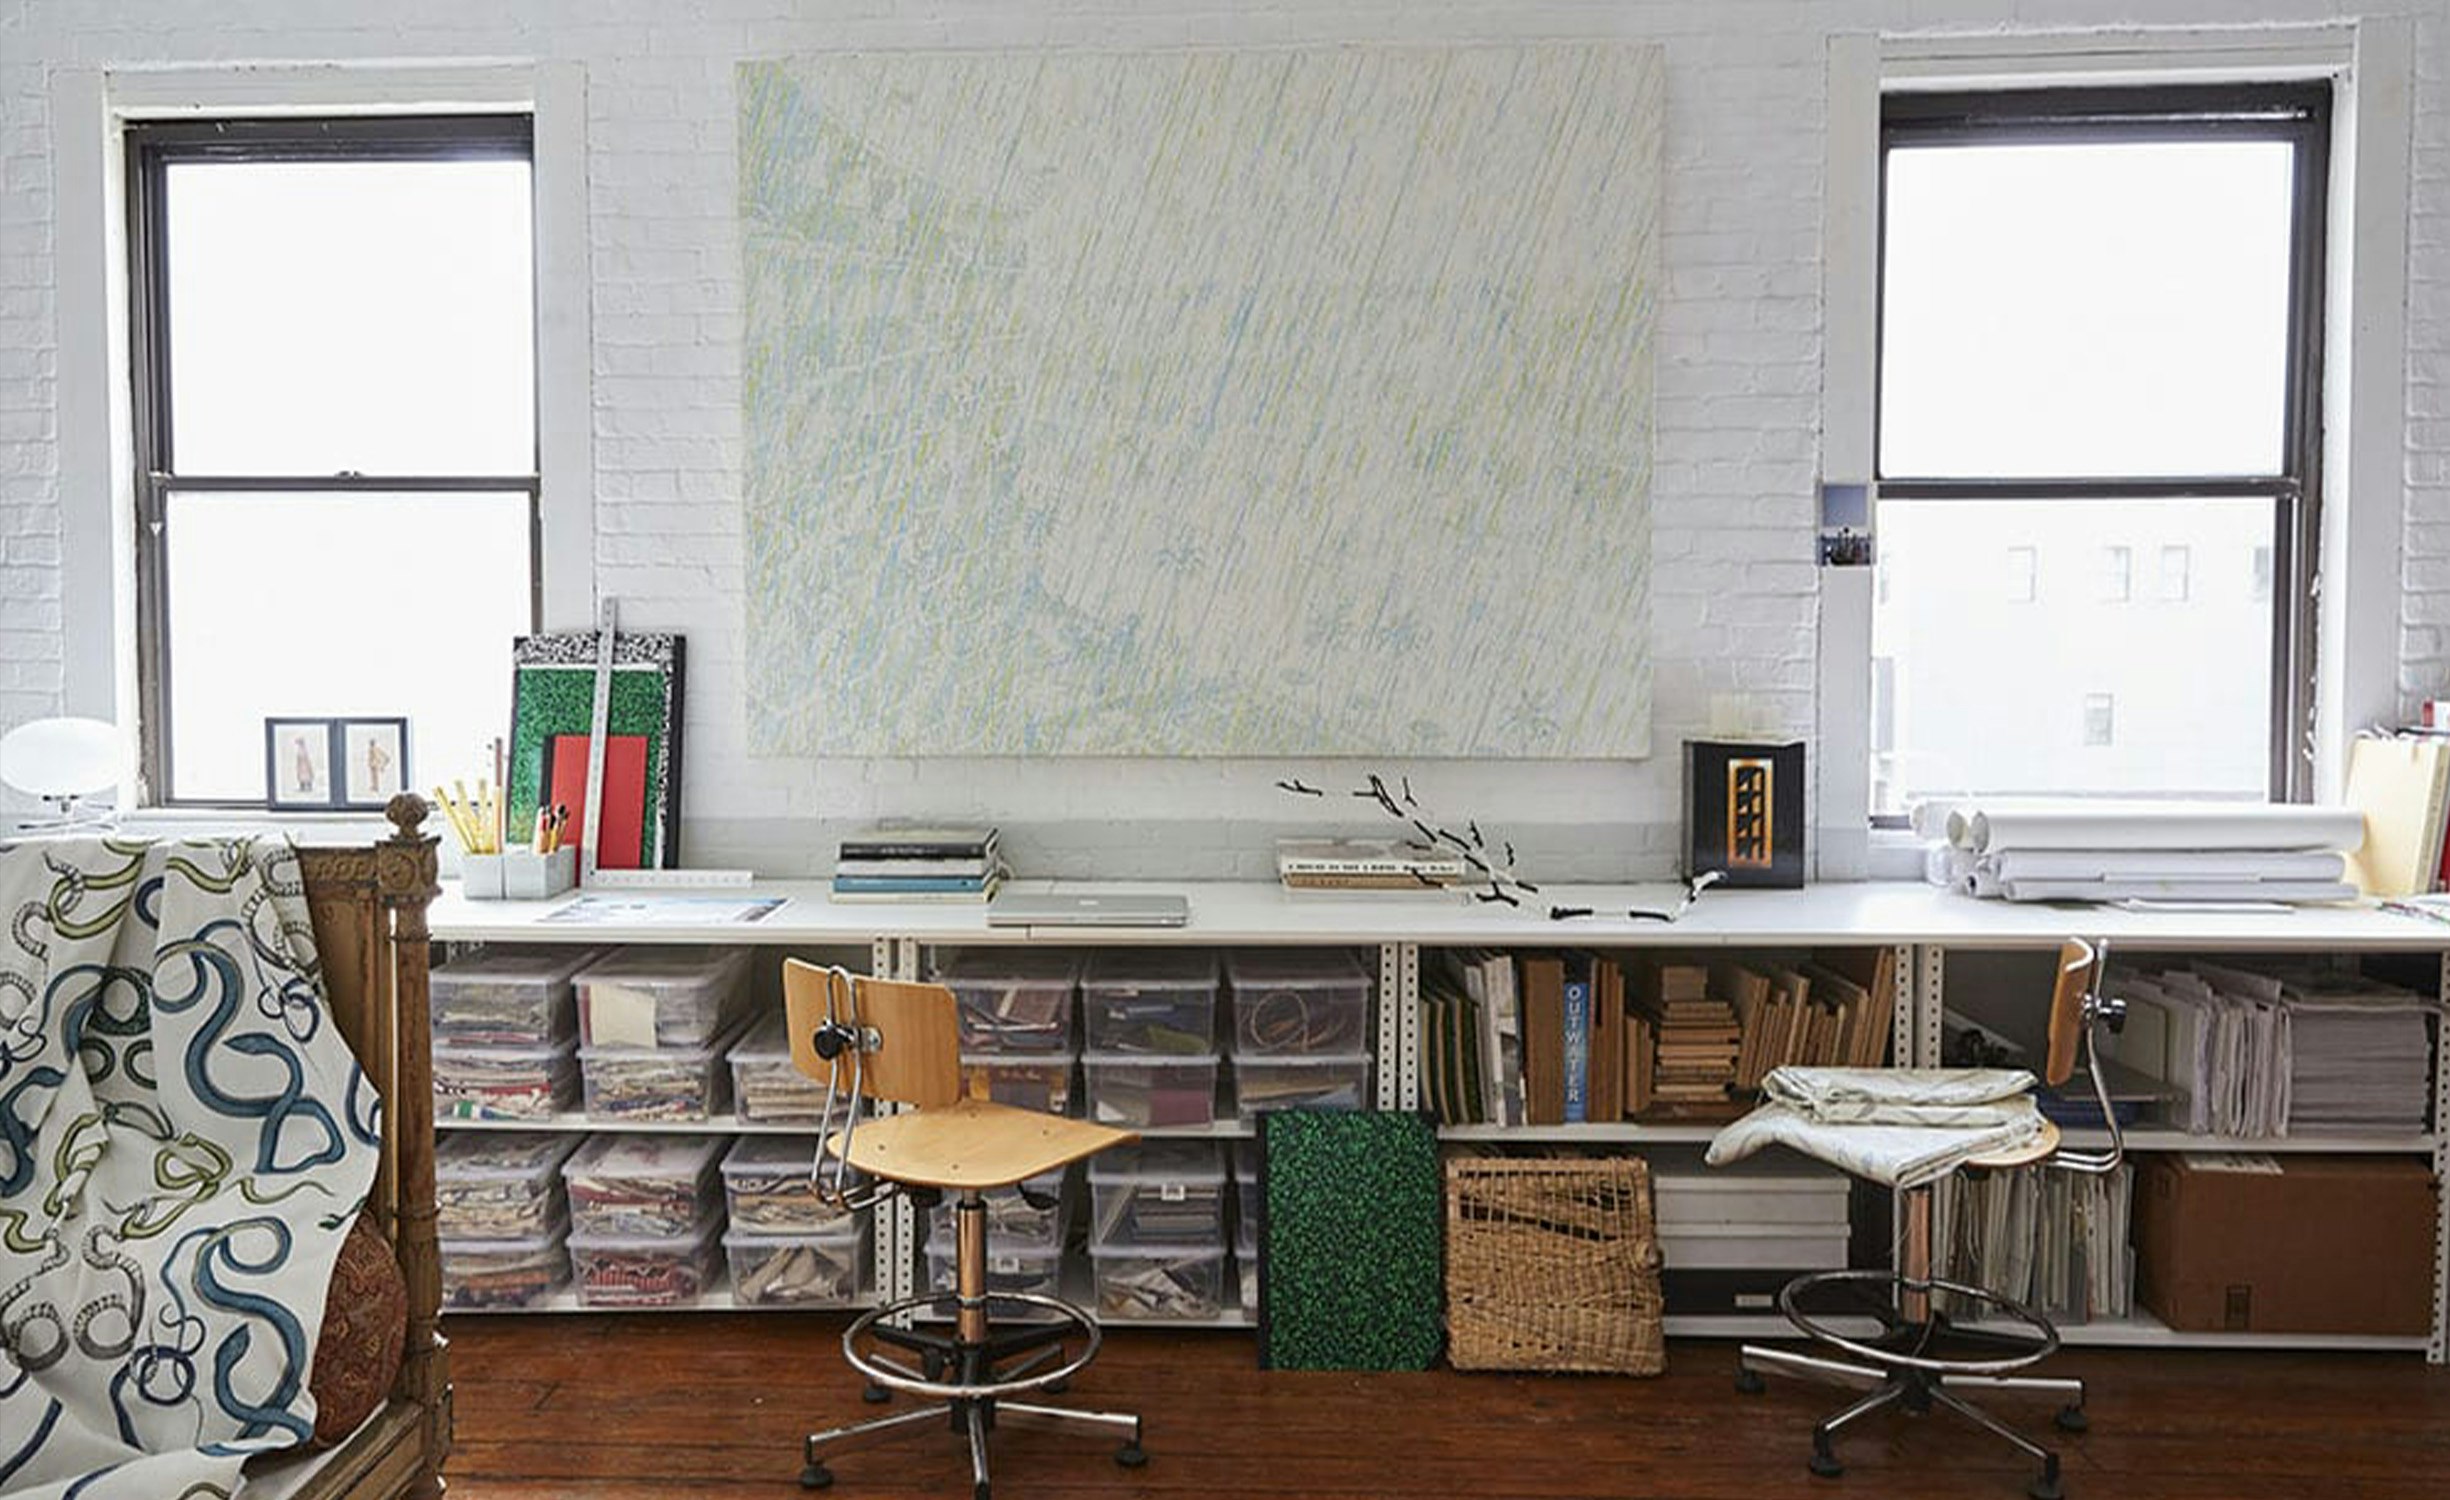 A room filled with natural light shows a long desk in front of a large piece of art between two windows